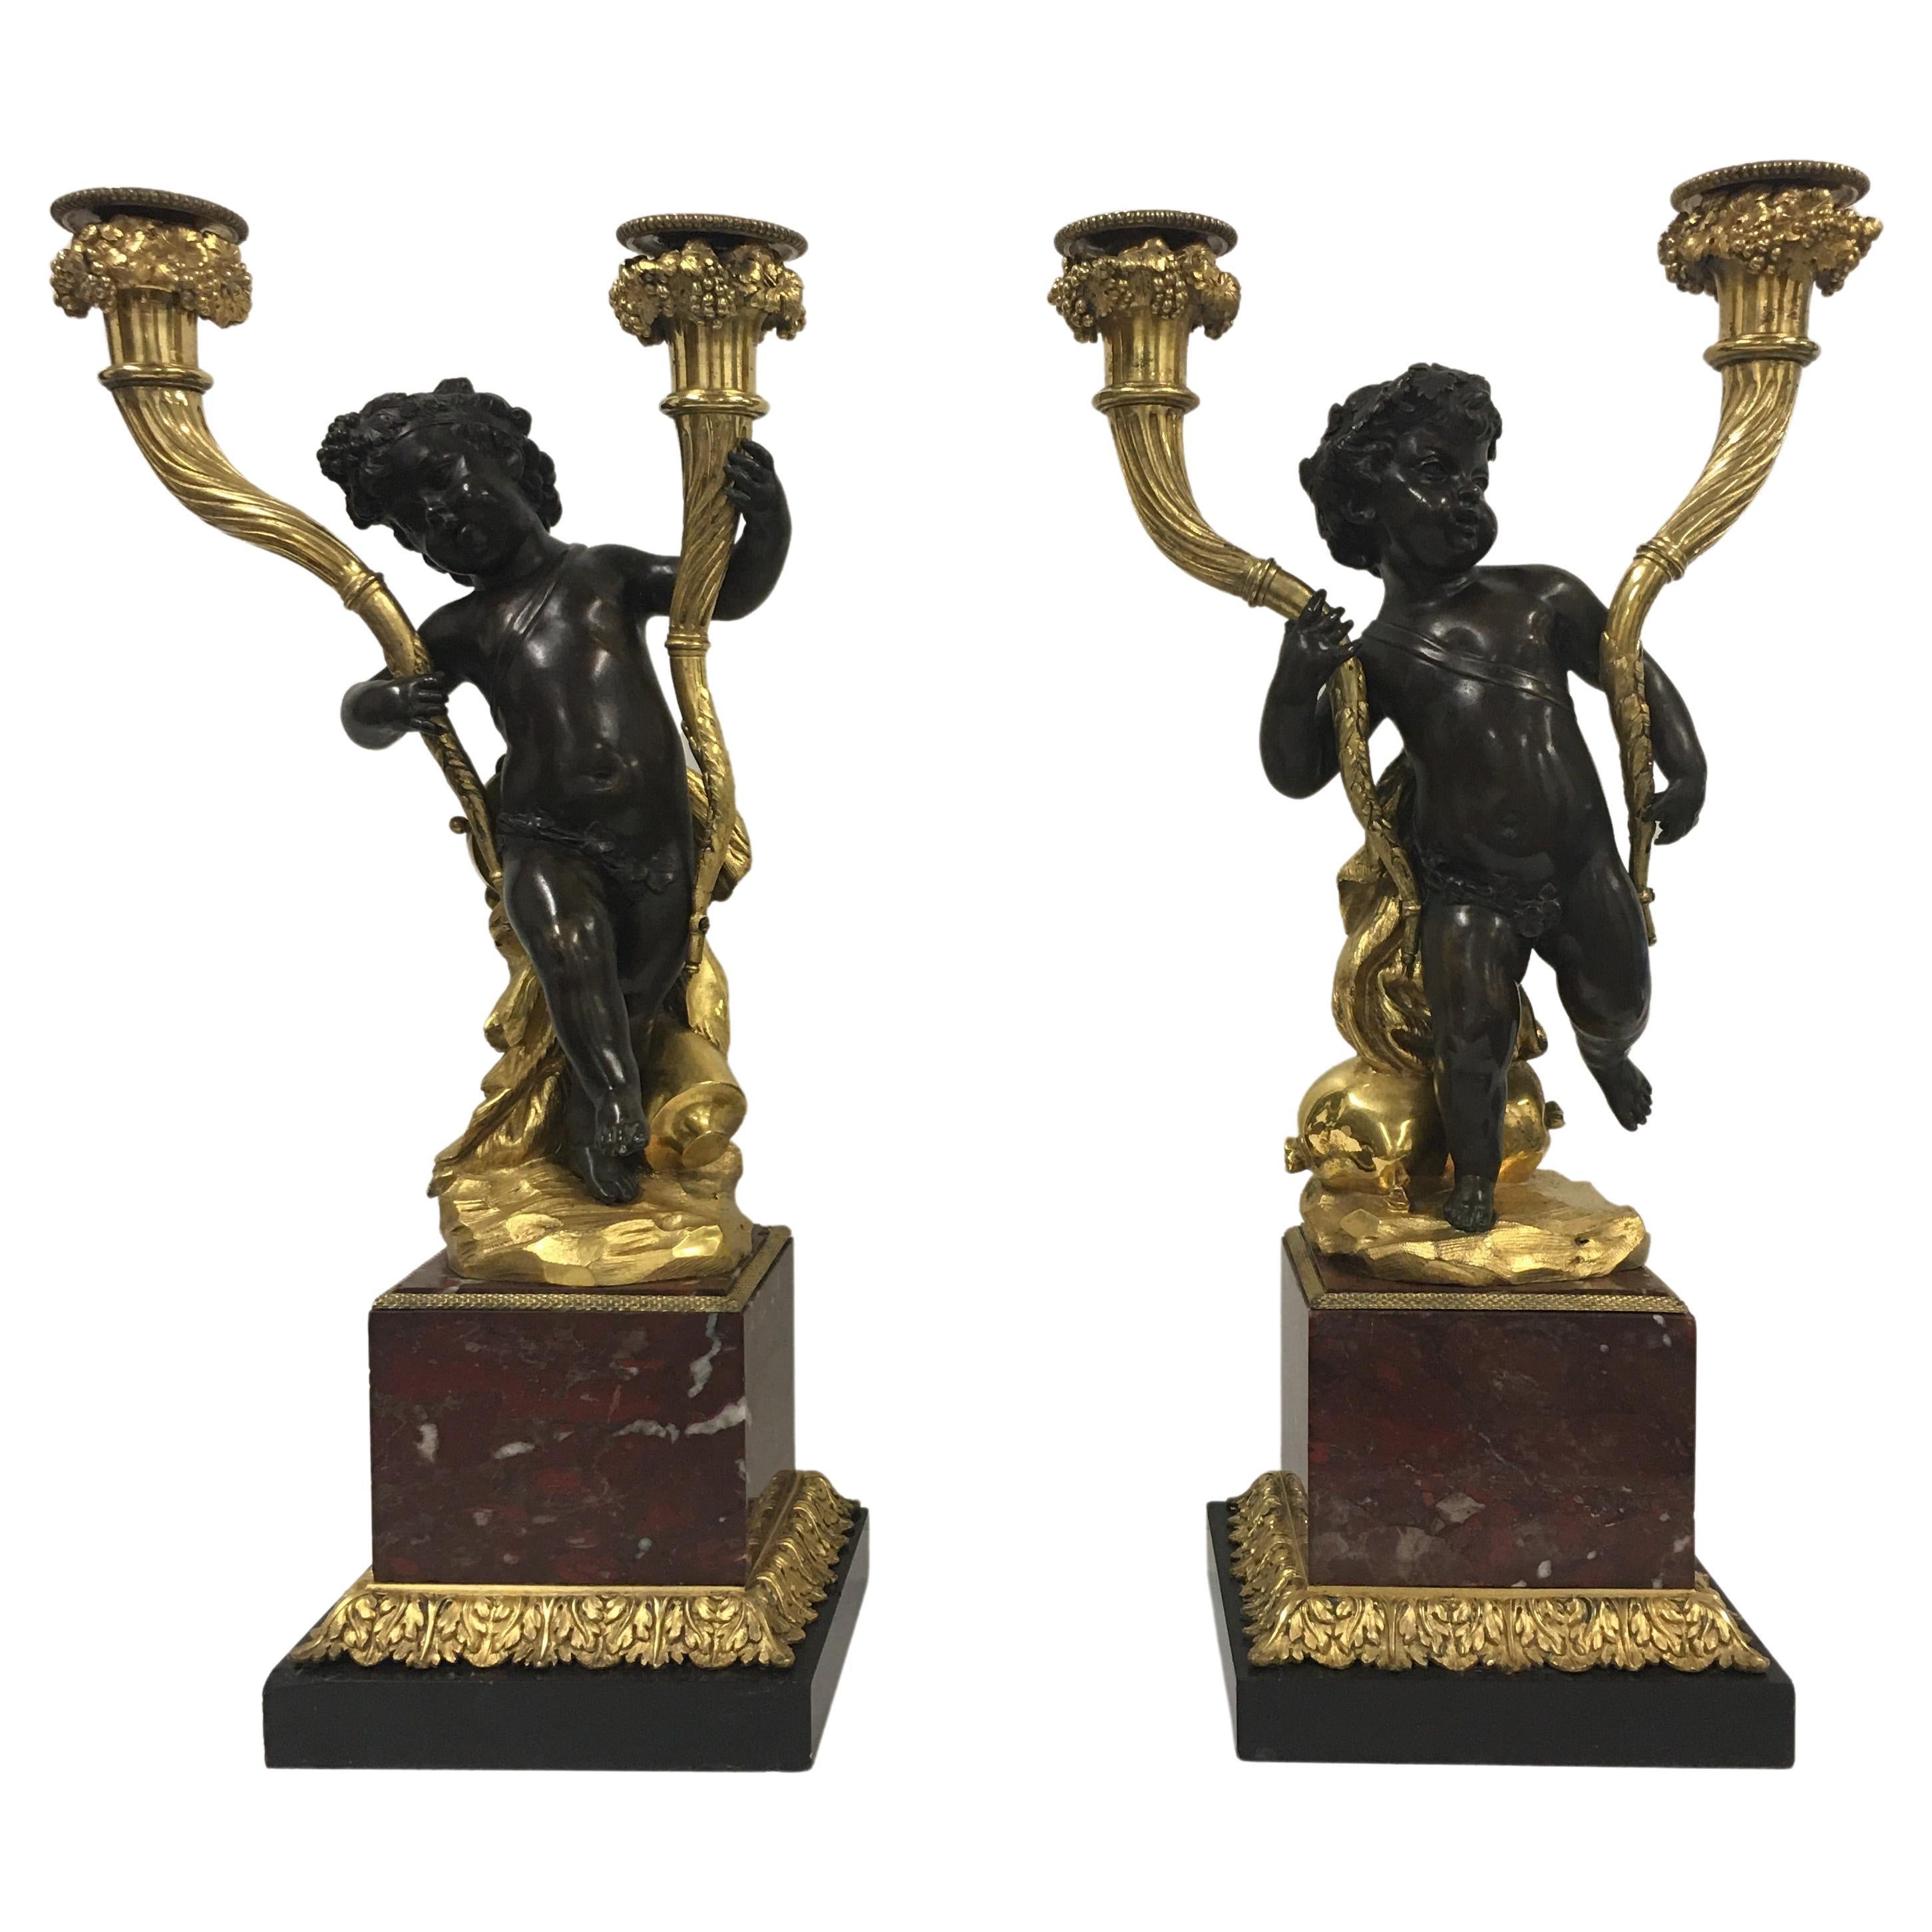 Pair of French 18th c. Louis XV mercury gilt and patinated bronze candelabras